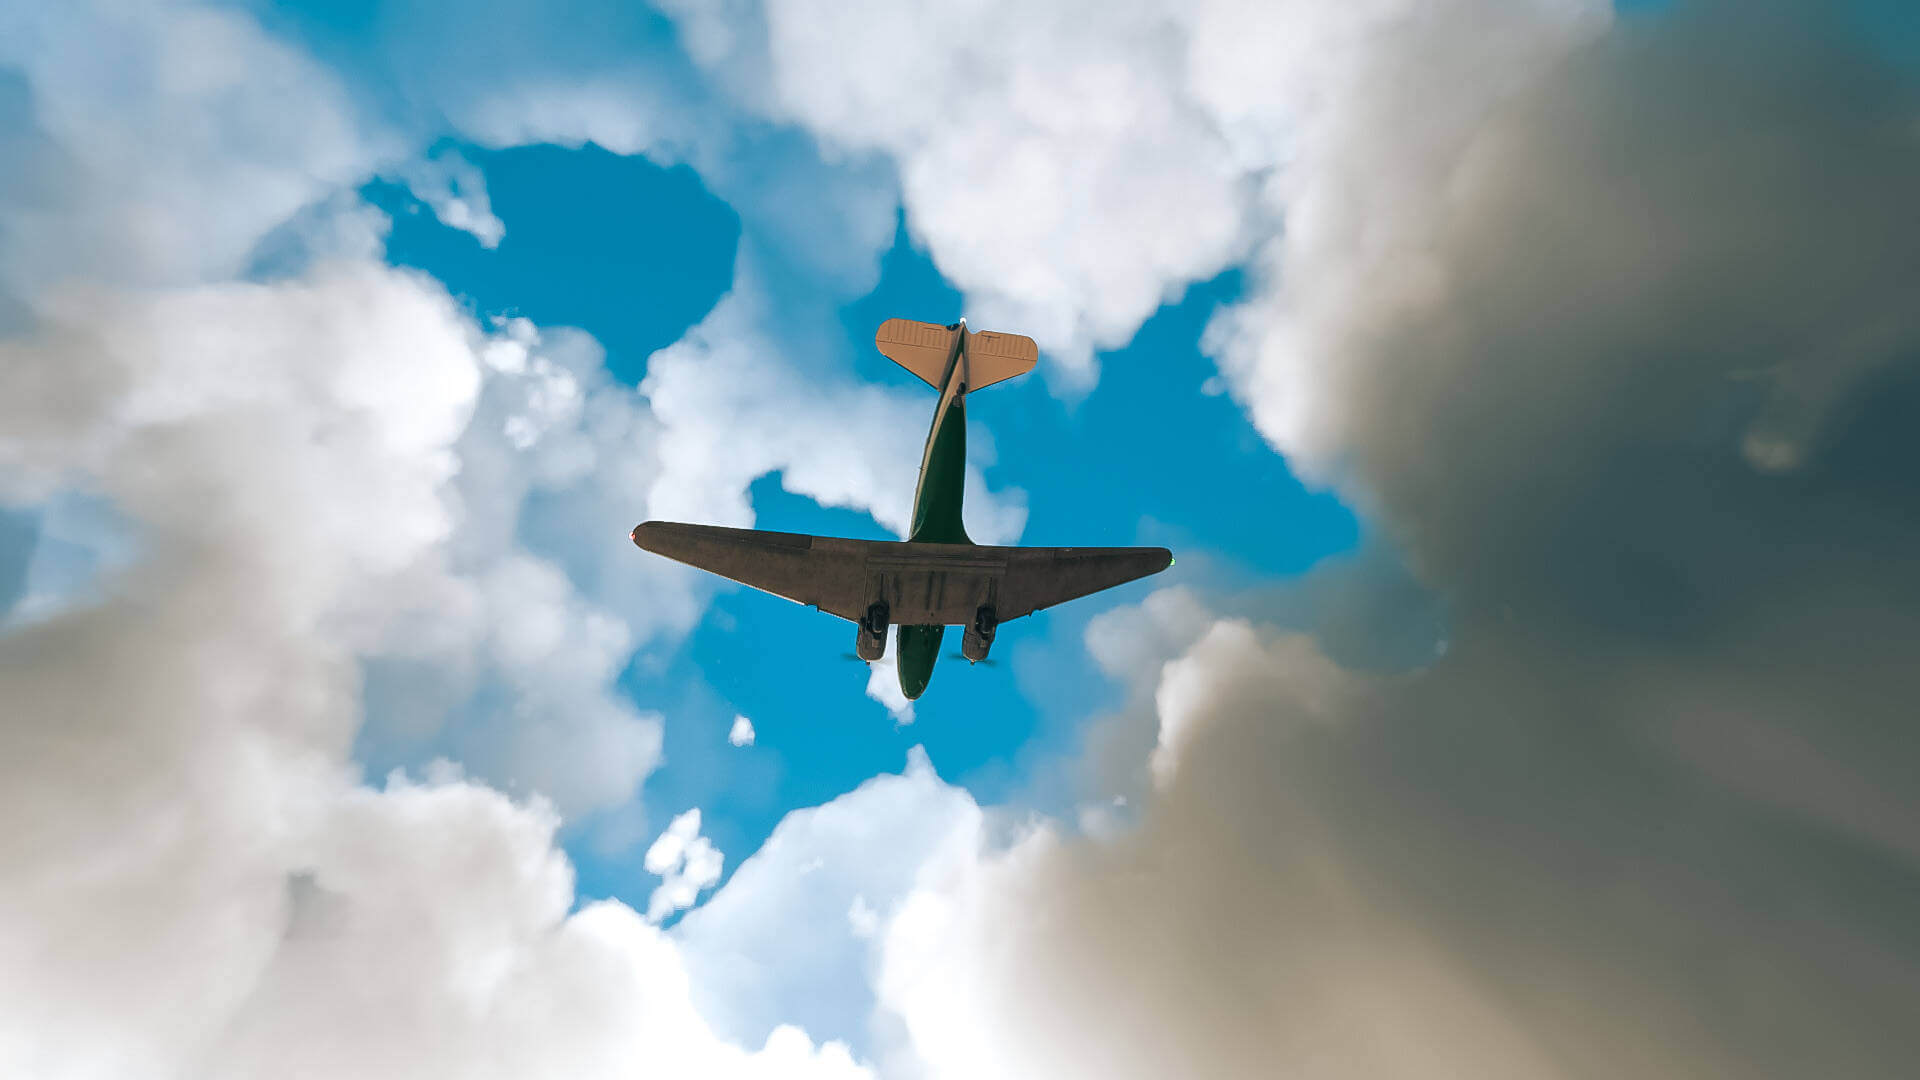 Bottom up view of a twin engine plane flying against a blue sky with white and gray cumulus clouds.